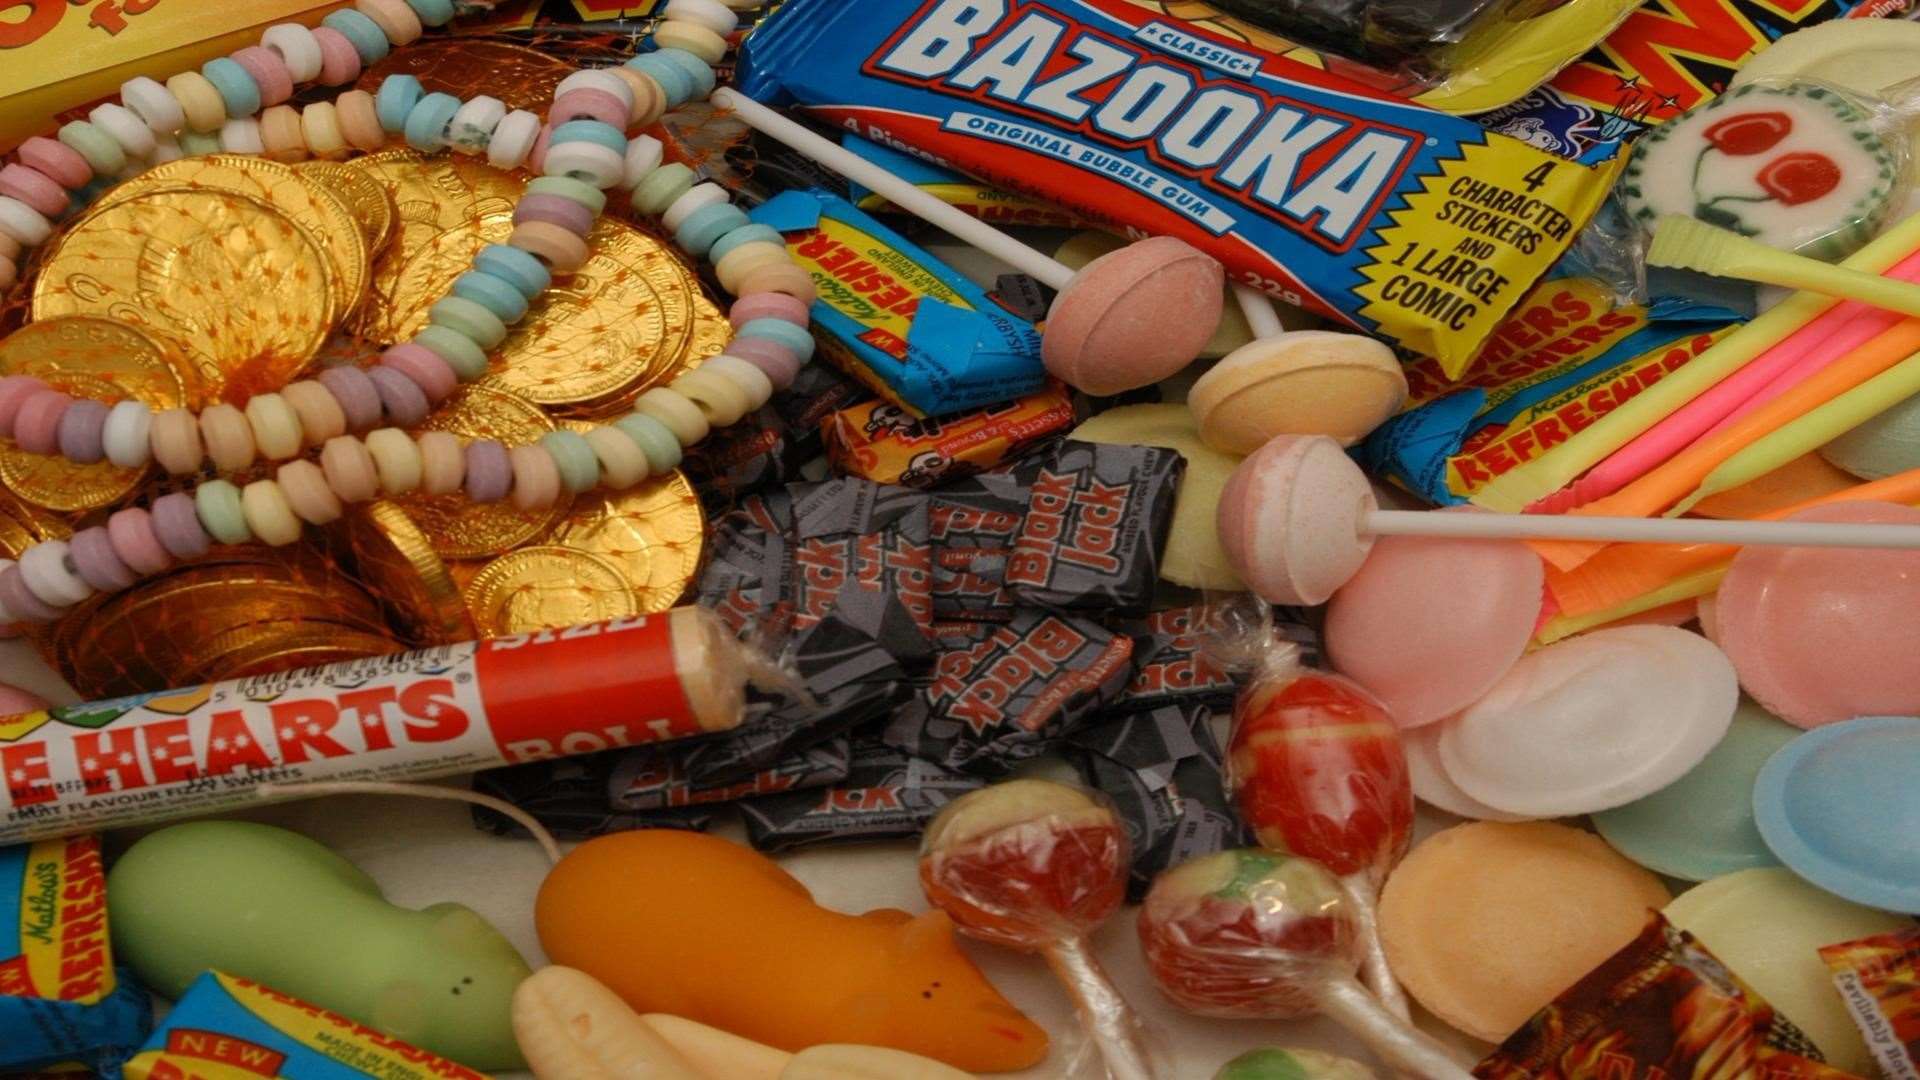 Do you think the cost of sweets has gone up considerably since you were a child?